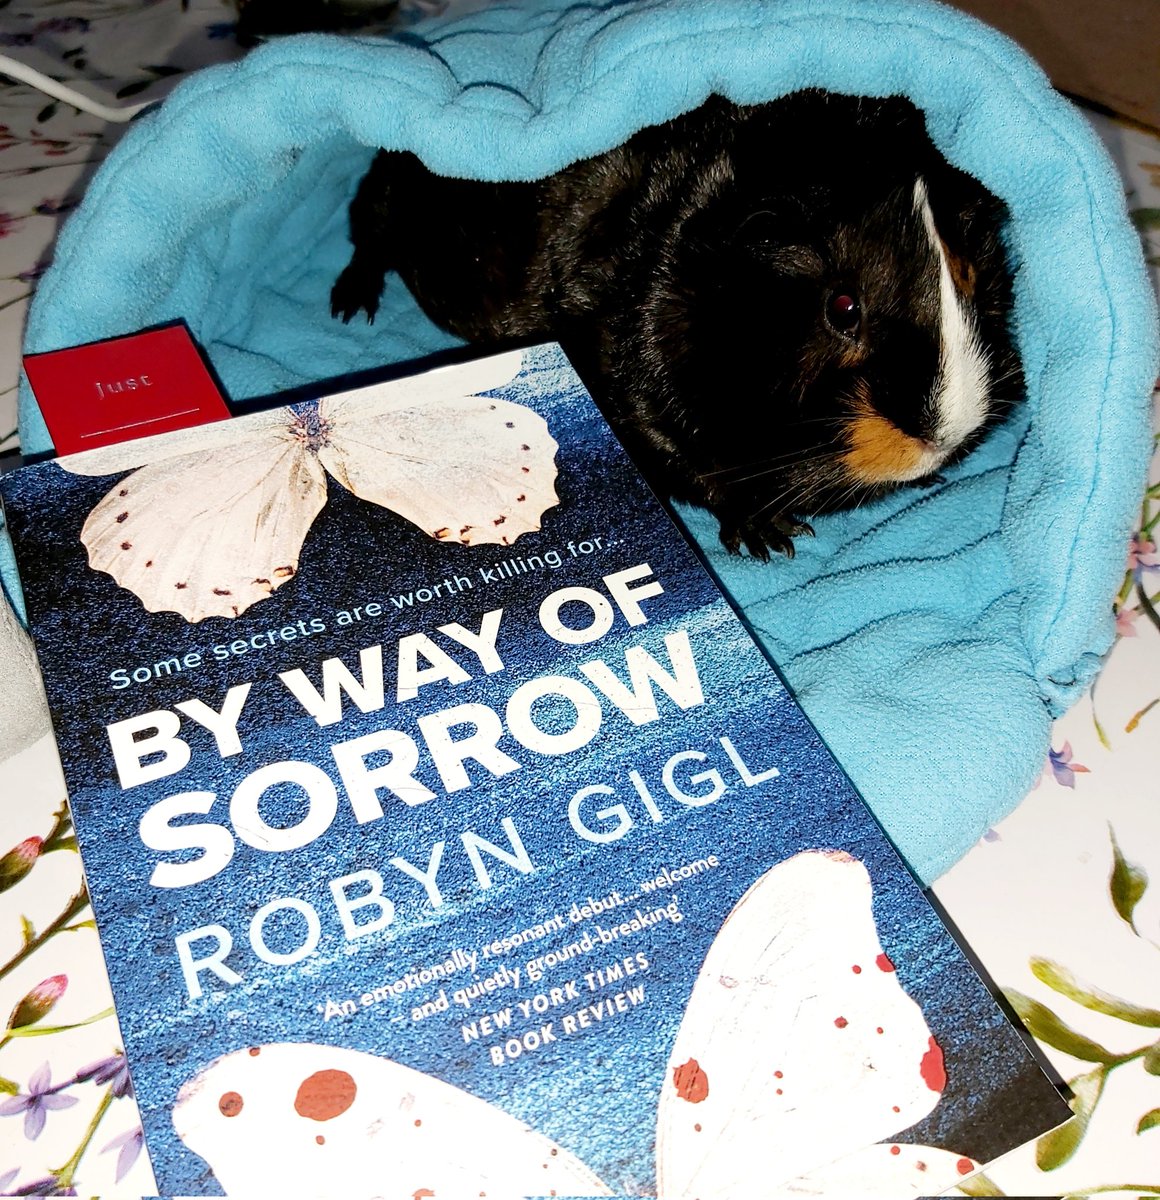 Well this book is really good and features a transgender lawyer, I think it's well written too...#ByWayOfSorrow @robyngigl 🏳️‍🌈